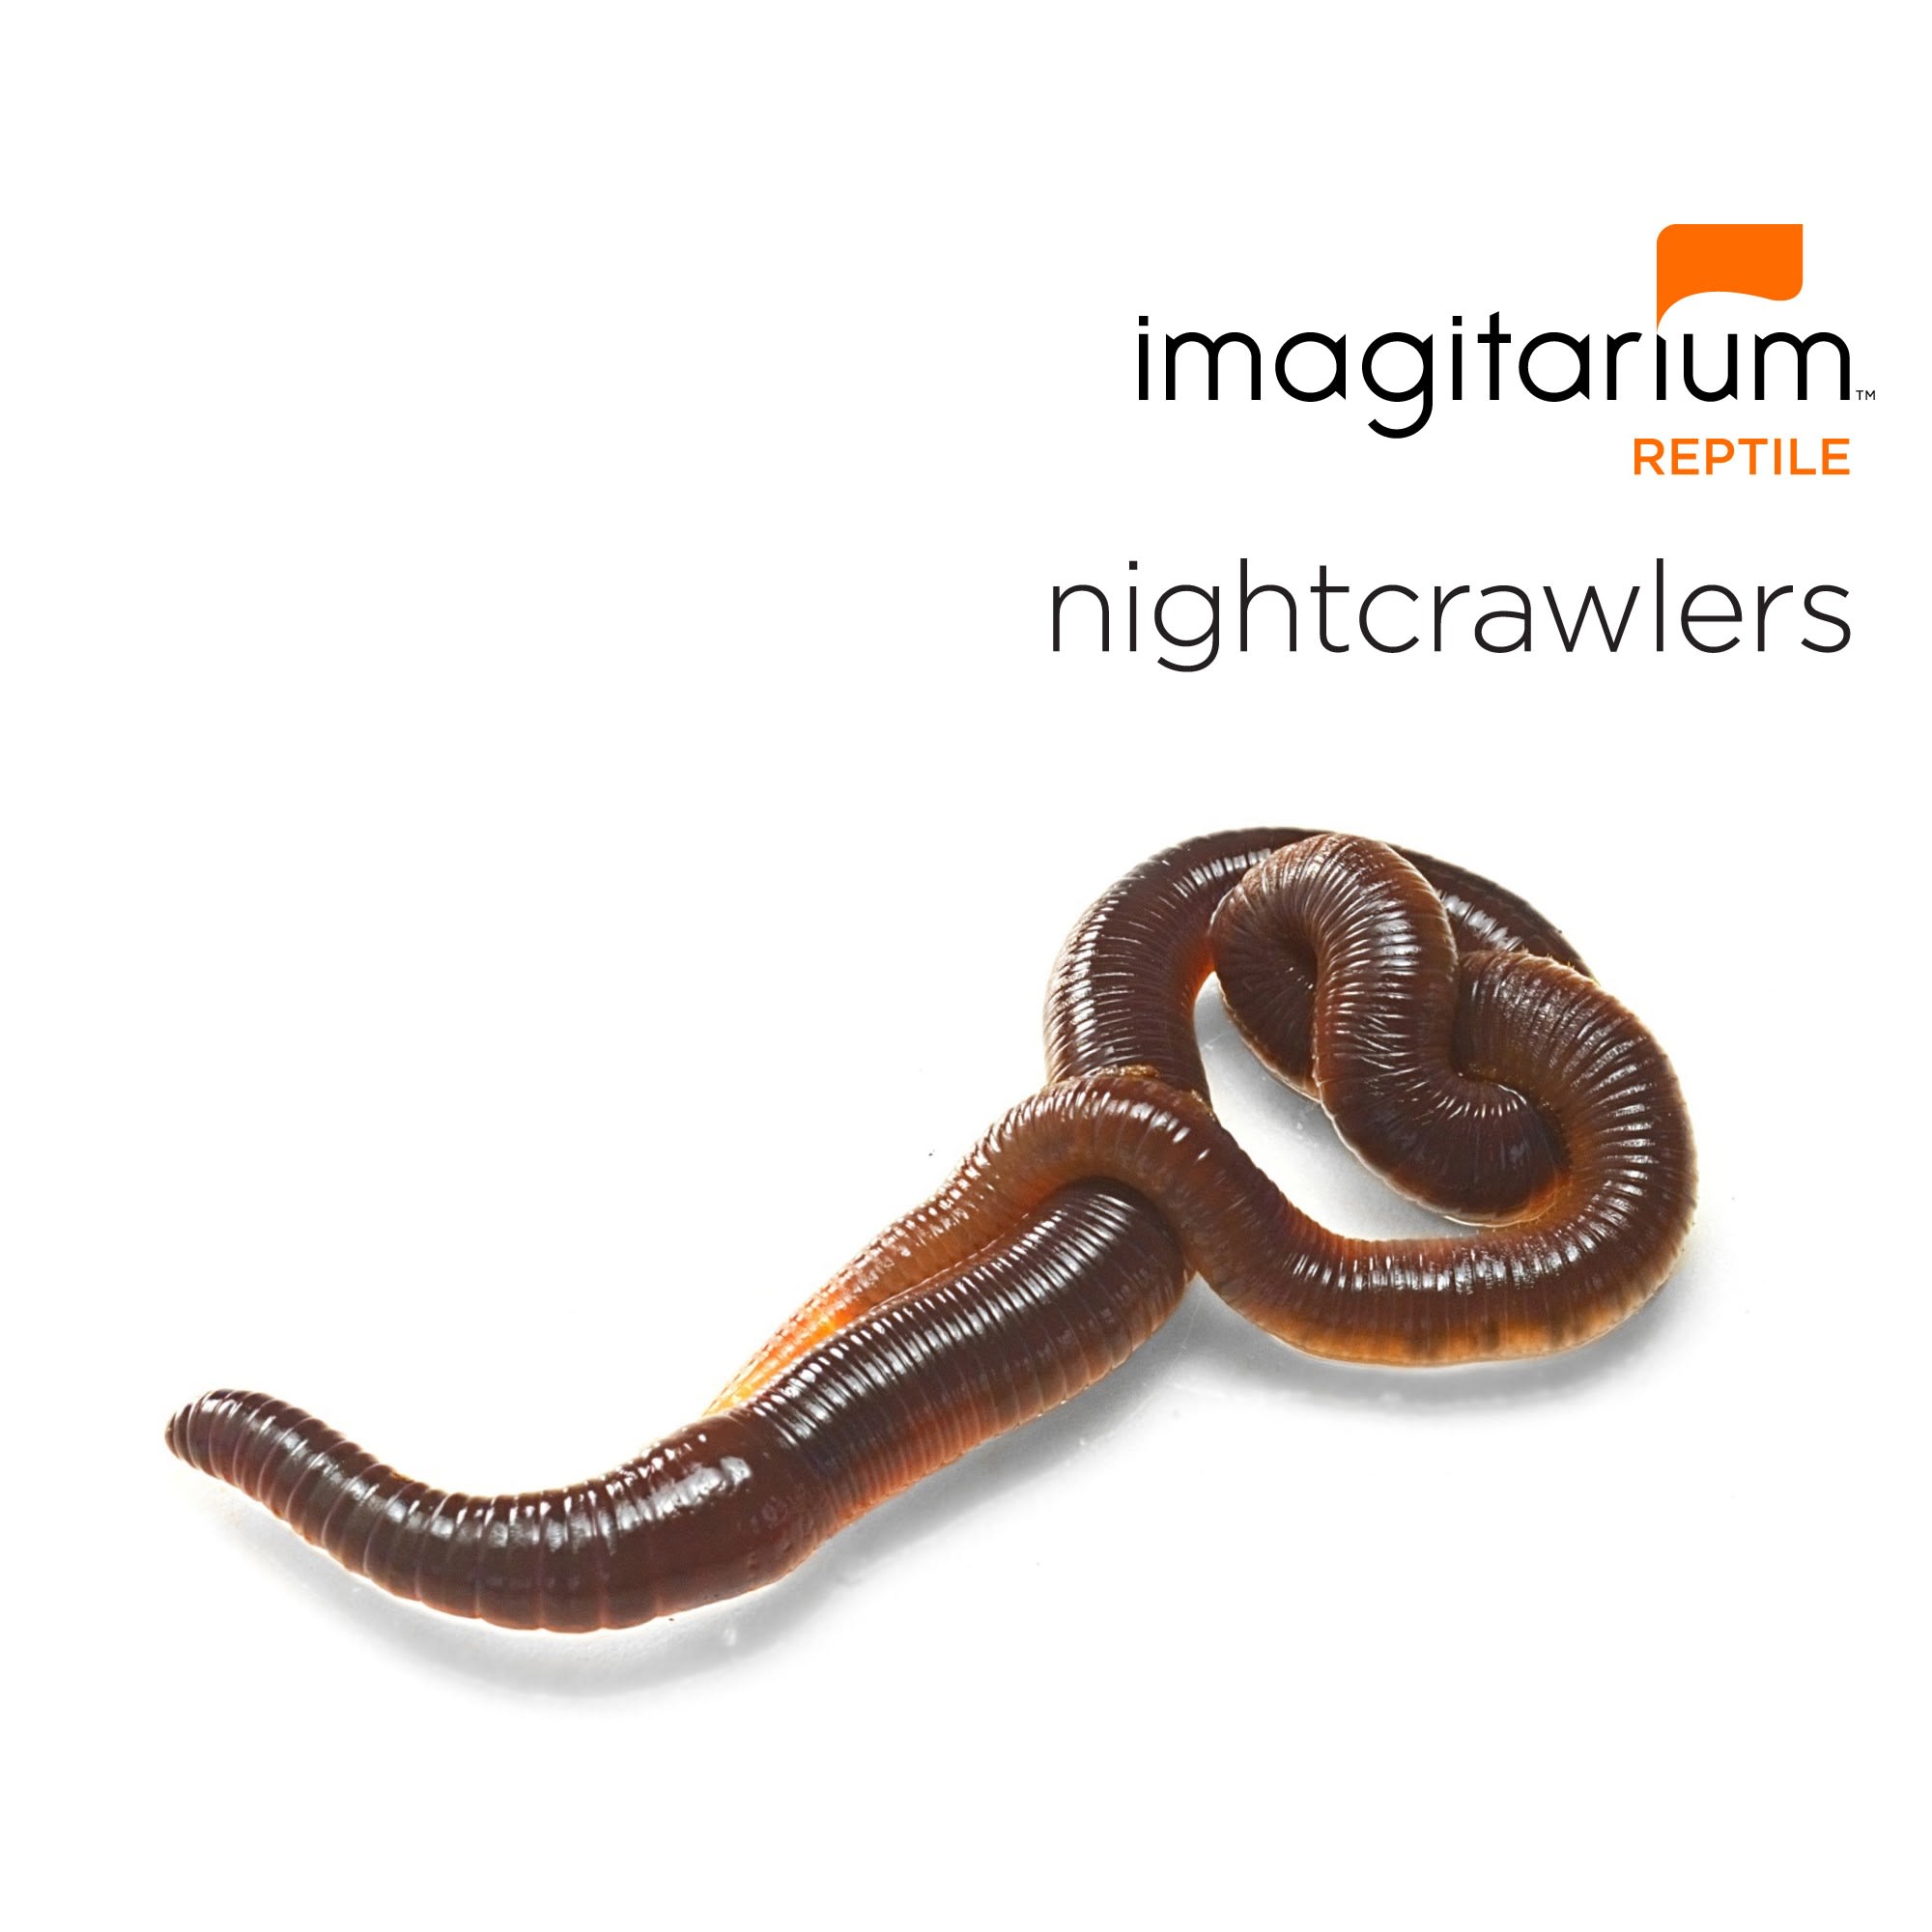 Nightcrawlers For Sale - Count of 12